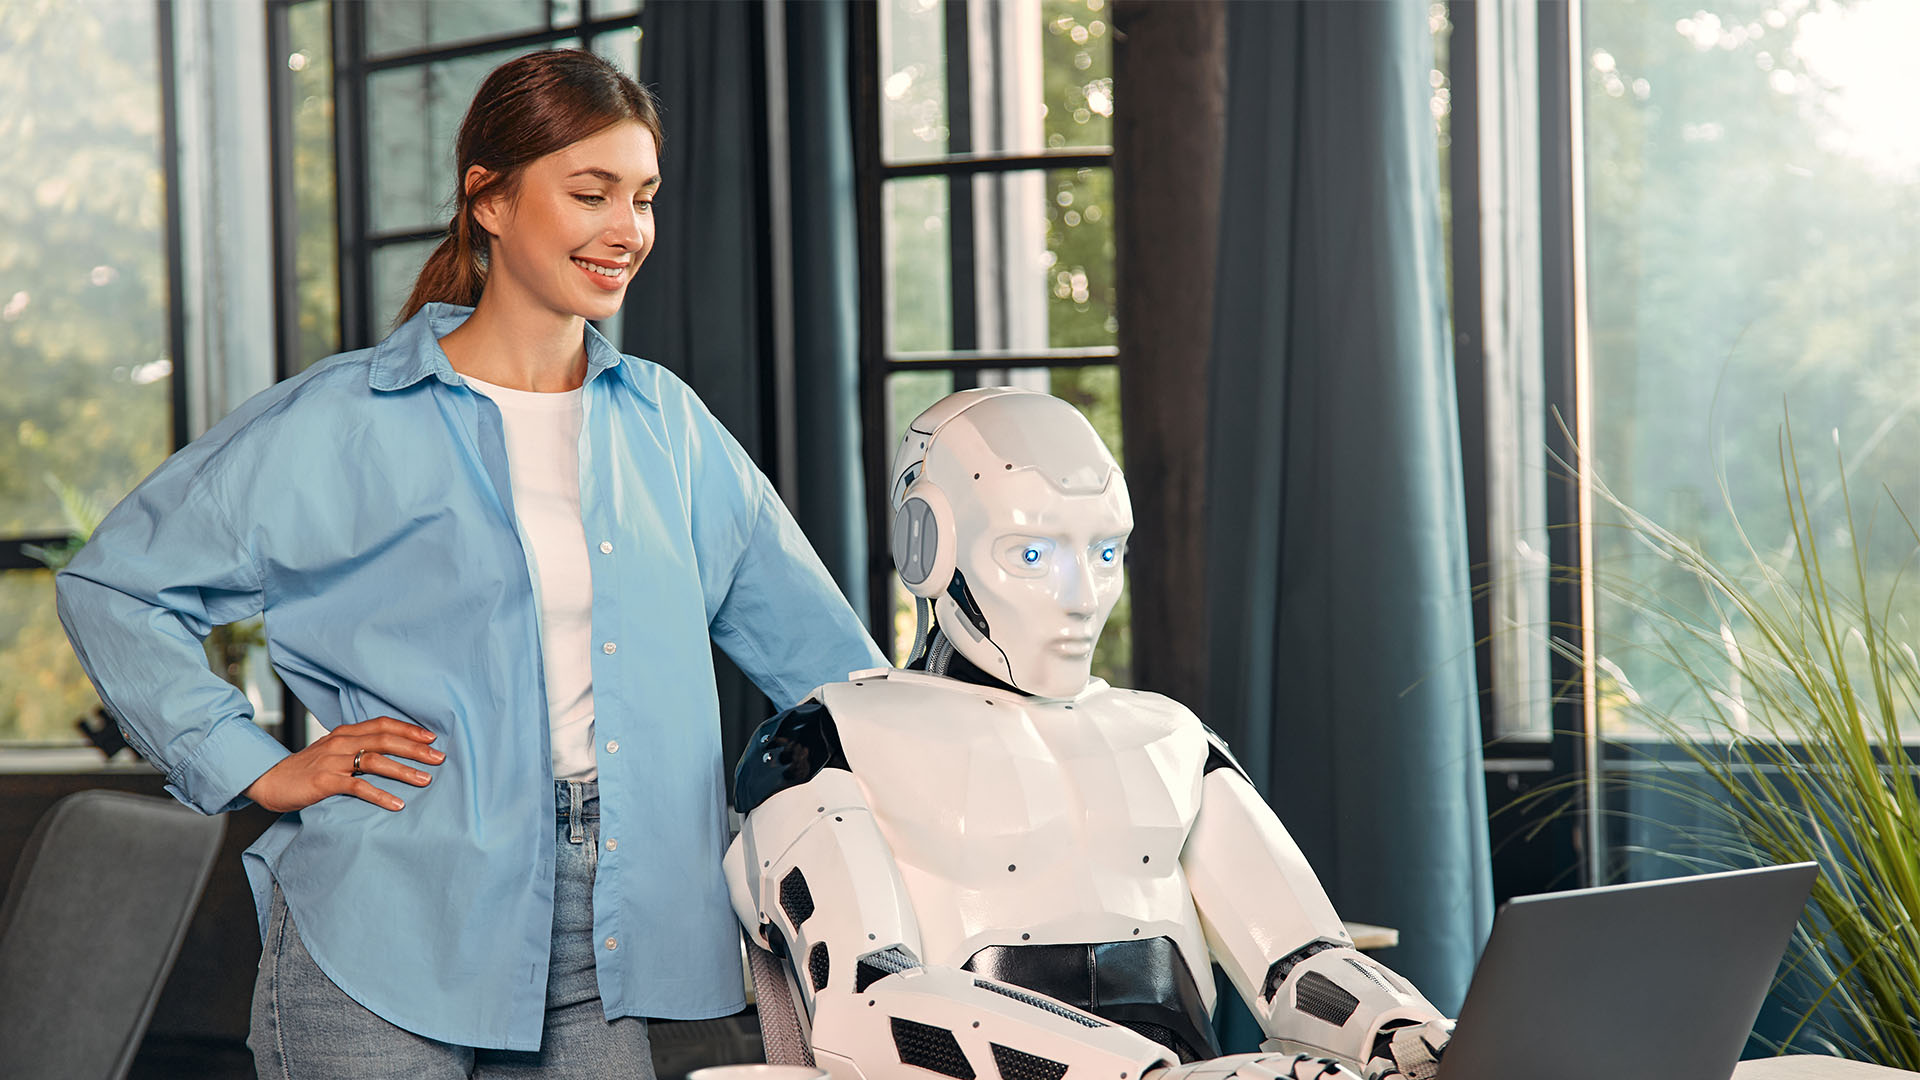 A woman in a blue shirt stands beside a seated humanoid robot looking at a laptop in a modern room with large windows, exemplifying the battle for the newsroom between human vs. machine.